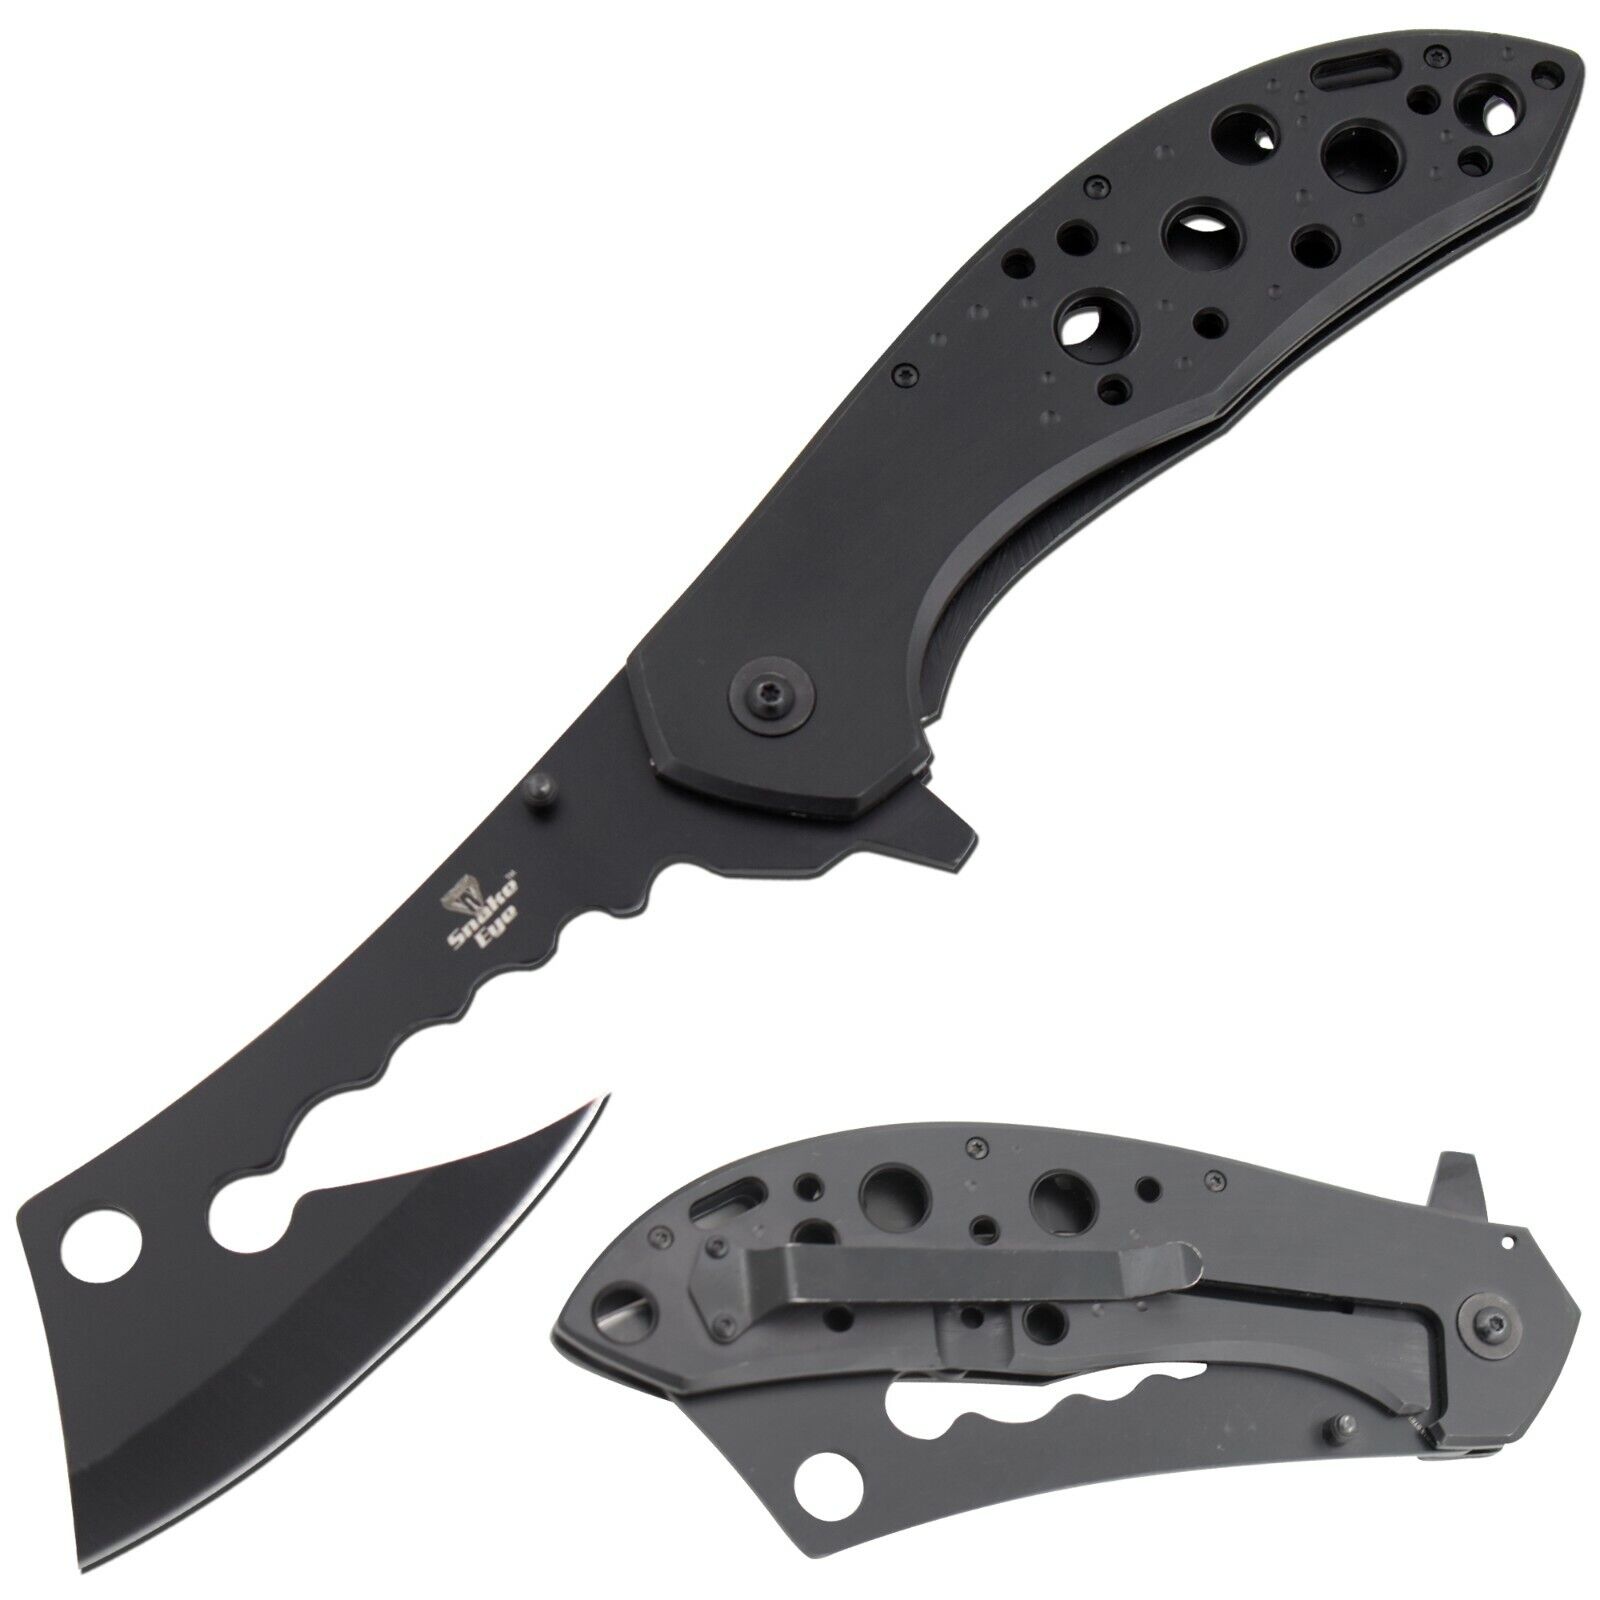 Snake Eye Tactical Every Day Carry Mini-Cleaver Style Blade Gaint Folding Knife 